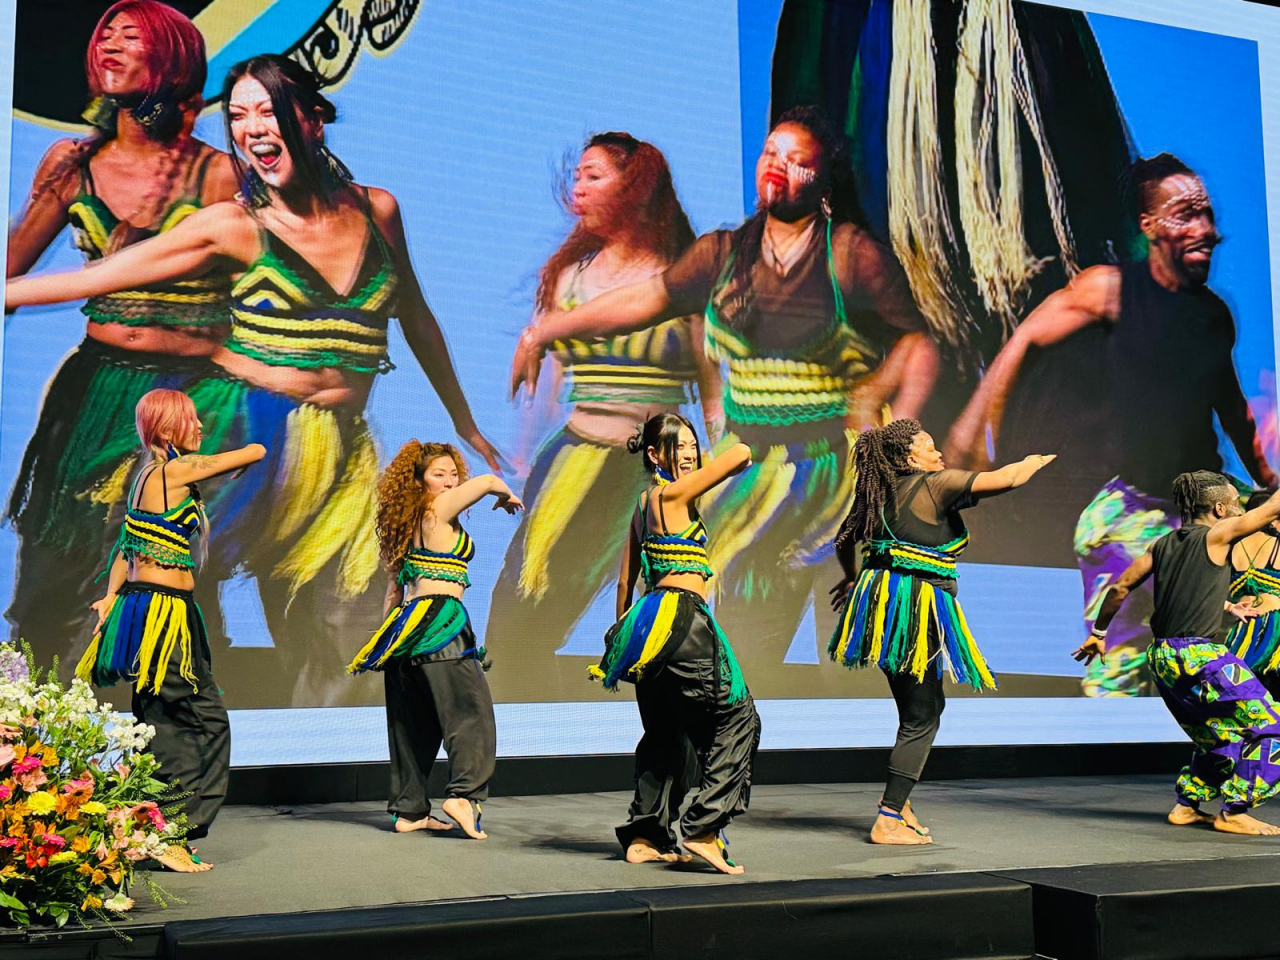 Artists perform dance at the commemoration of Tanzania's Independence Day and 32nd years of Tanzania-Korea diplomatic ties celebration at JW Marriott Hotel in Seocho-gu, Seoul on Friday. (Sanjay Kumar/The Korea Herald)